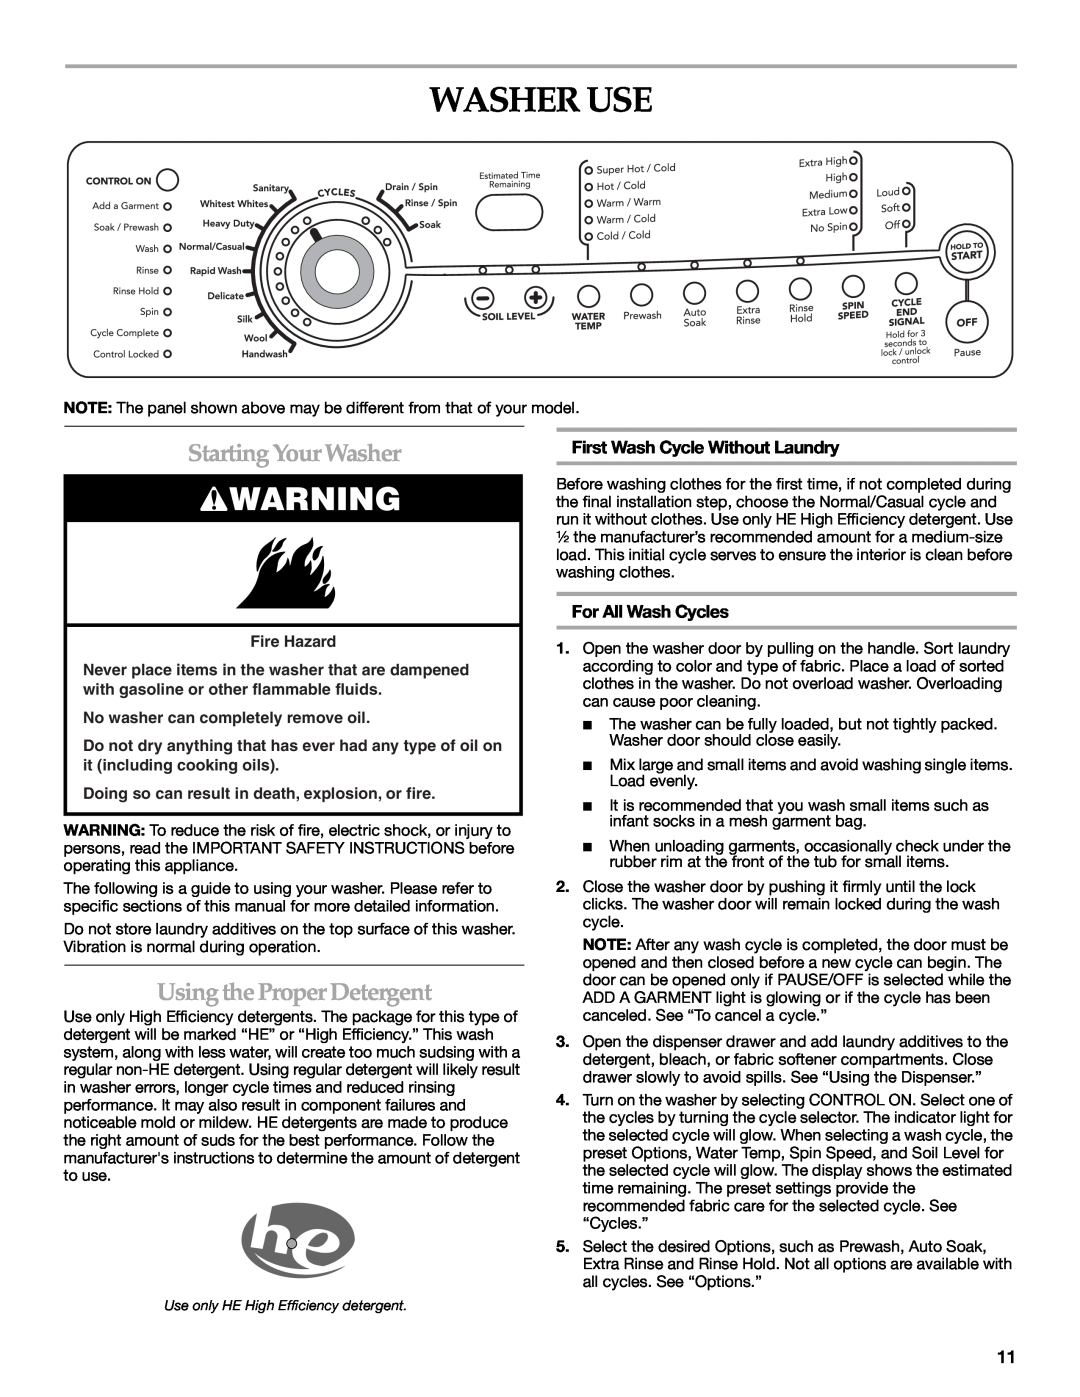 Maytag 8182969 Washer Use, Starting Your Washer, Using the Proper Detergent, First Wash Cycle Without Laundry, Fire Hazard 